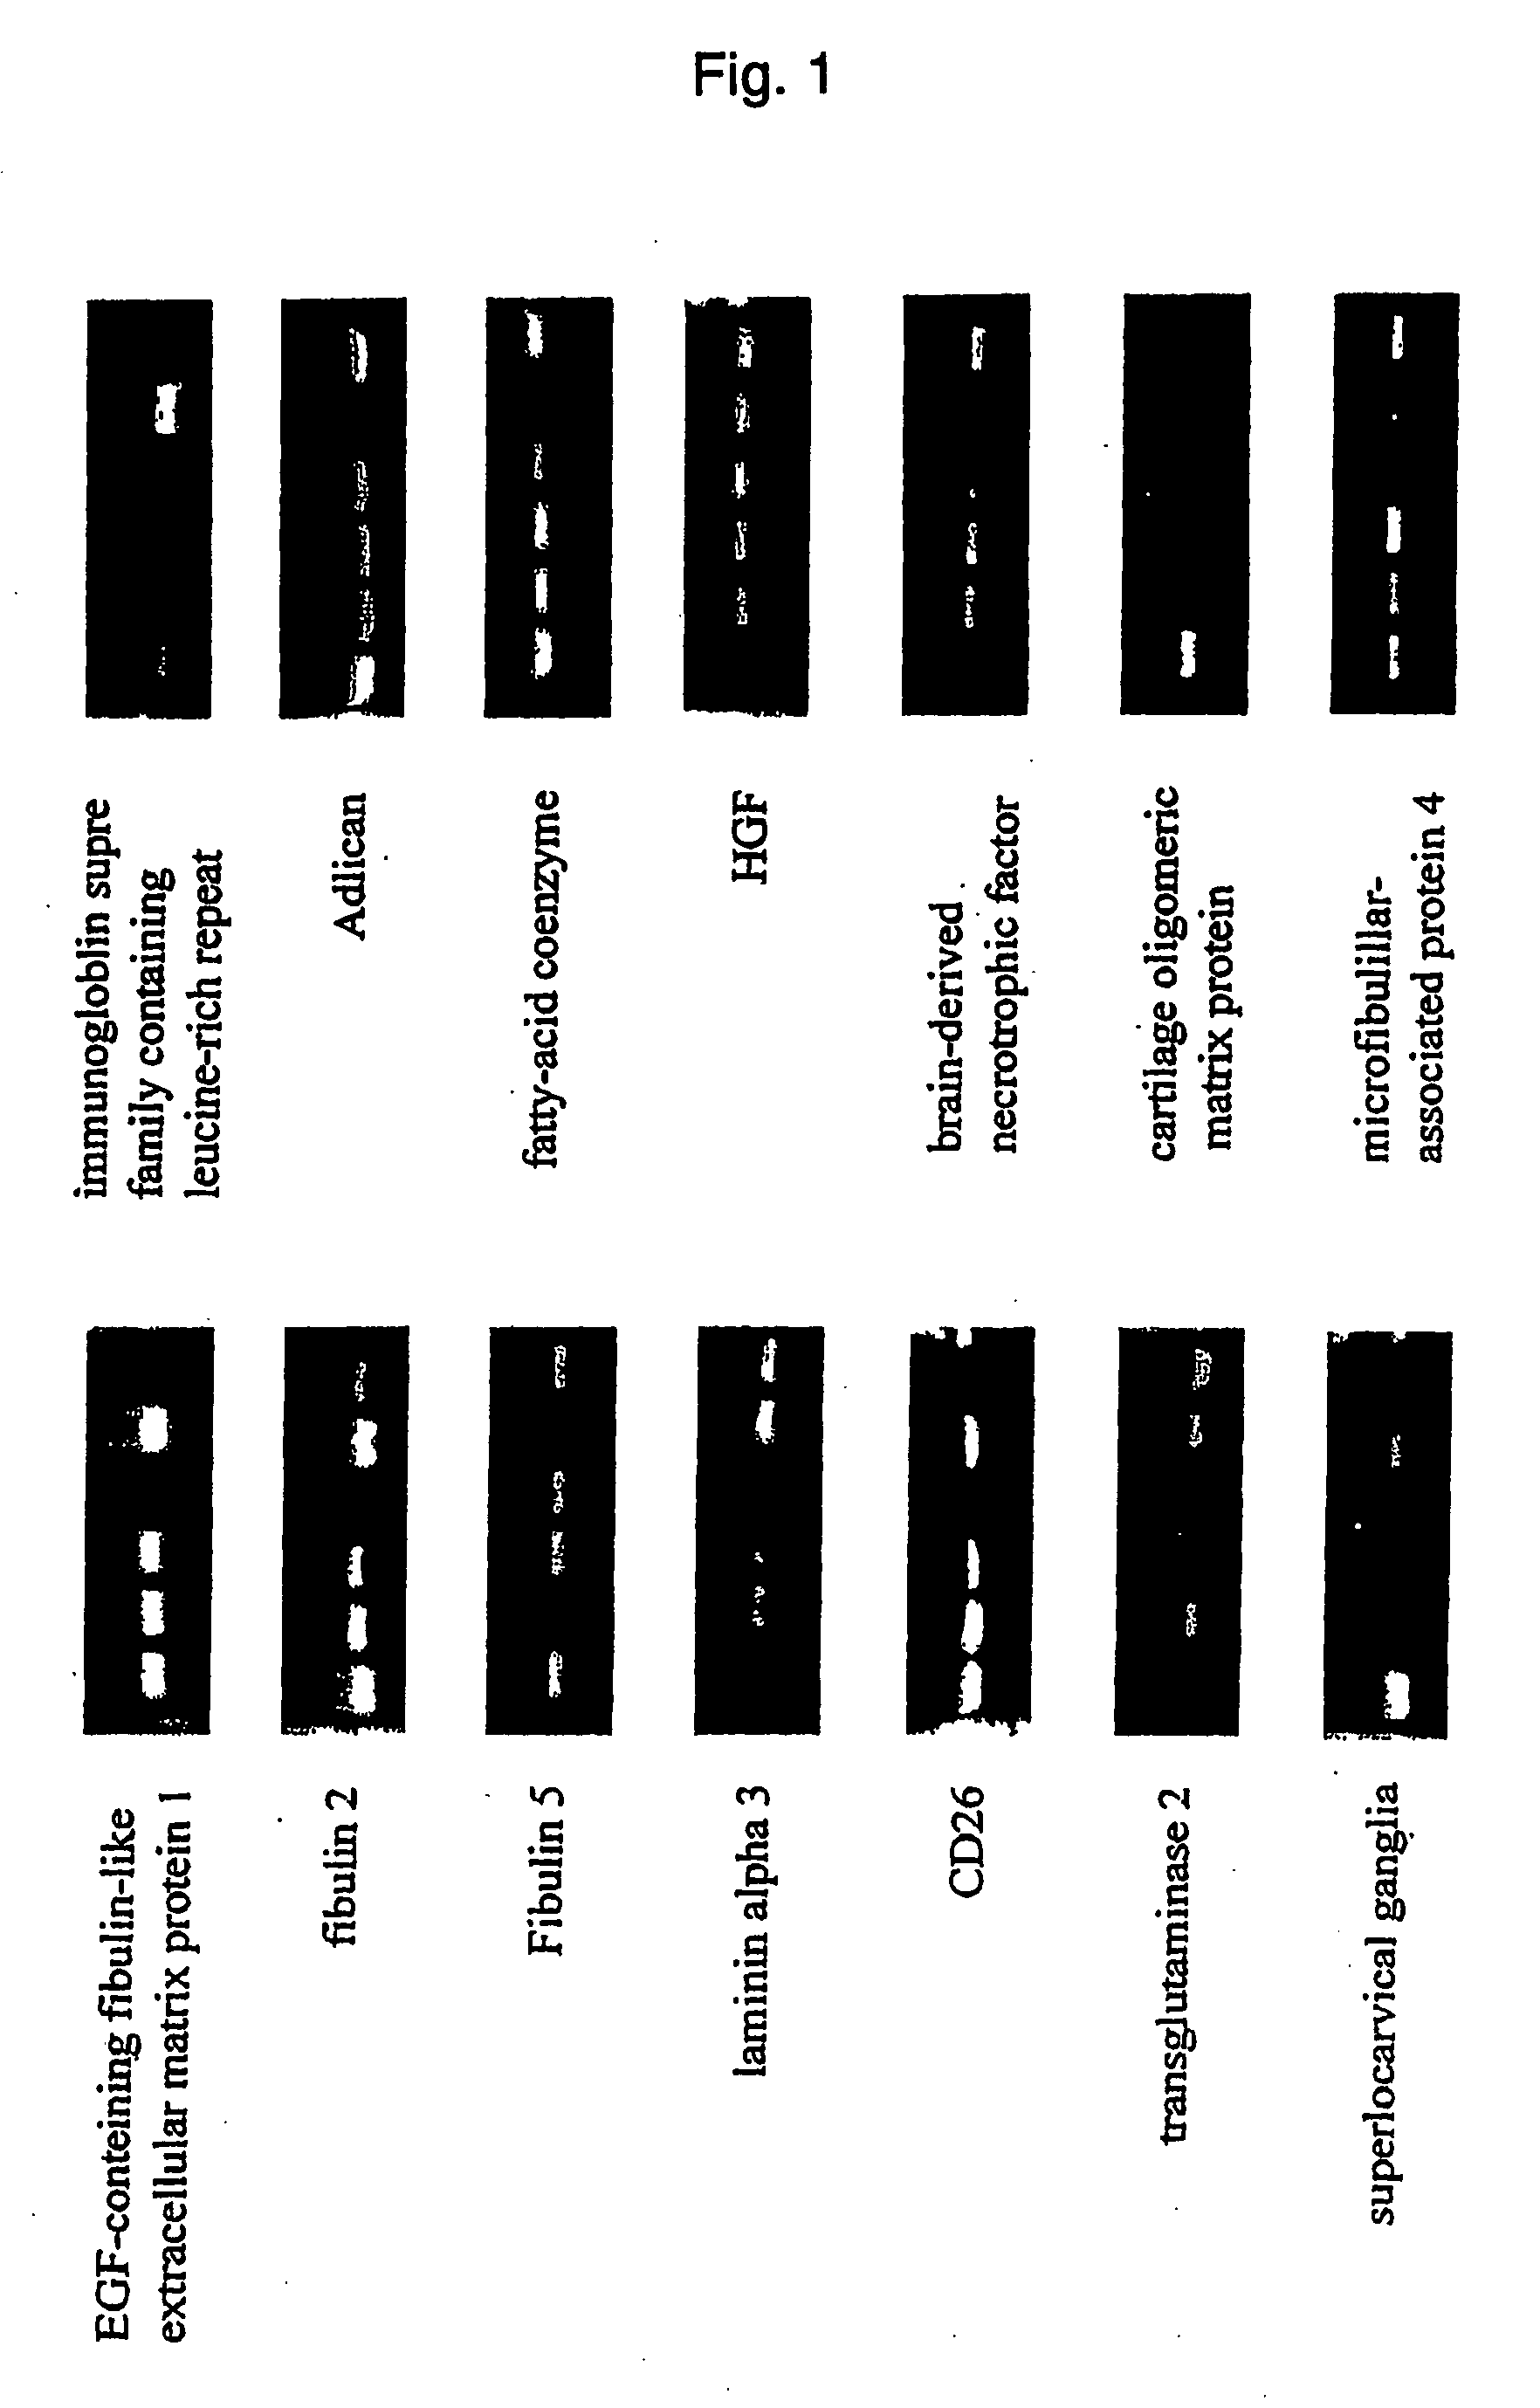 Marker for detecting mesenchymal stem cell and method of distinguishing mesenchymal stem cell using the marker